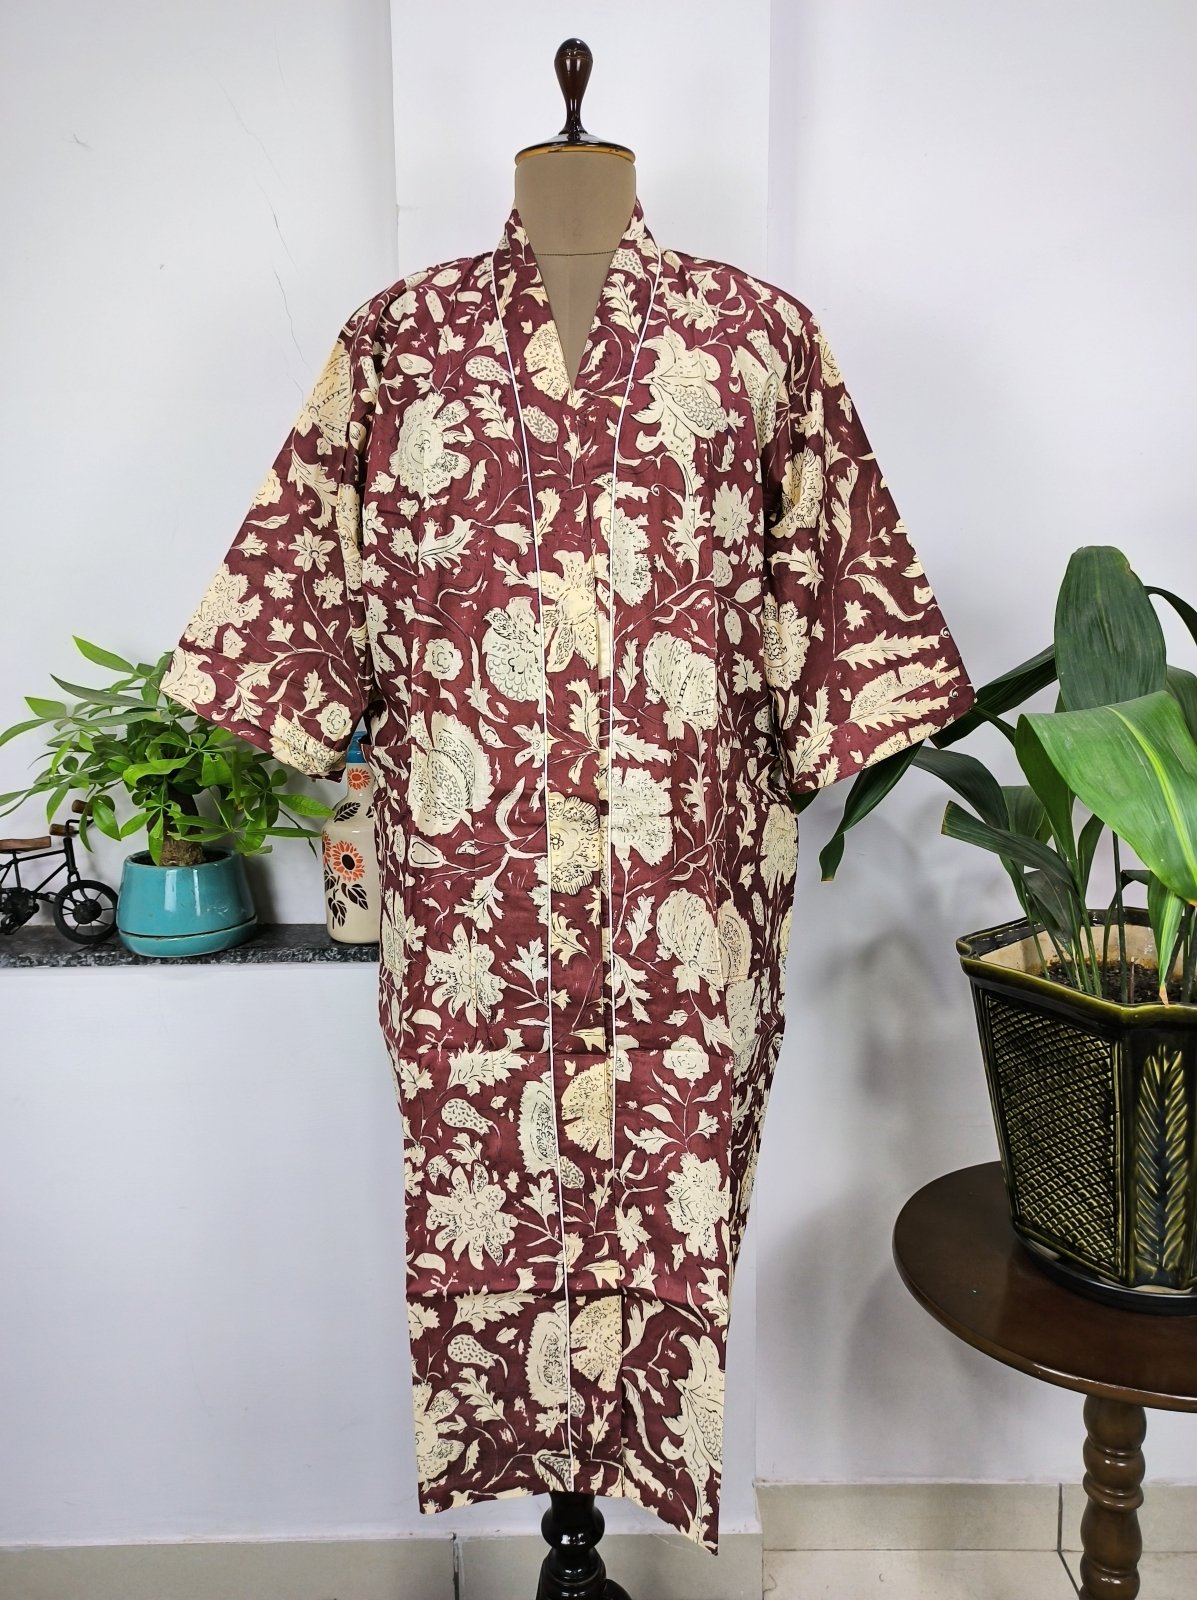 Pure Cotton Kimono Indian Handprinted Boho House Robe Summer Dress | Rusty Red Garden Floral Rose Luxury Cover Up | Maternity Mom Bridal - The Eastern Loom